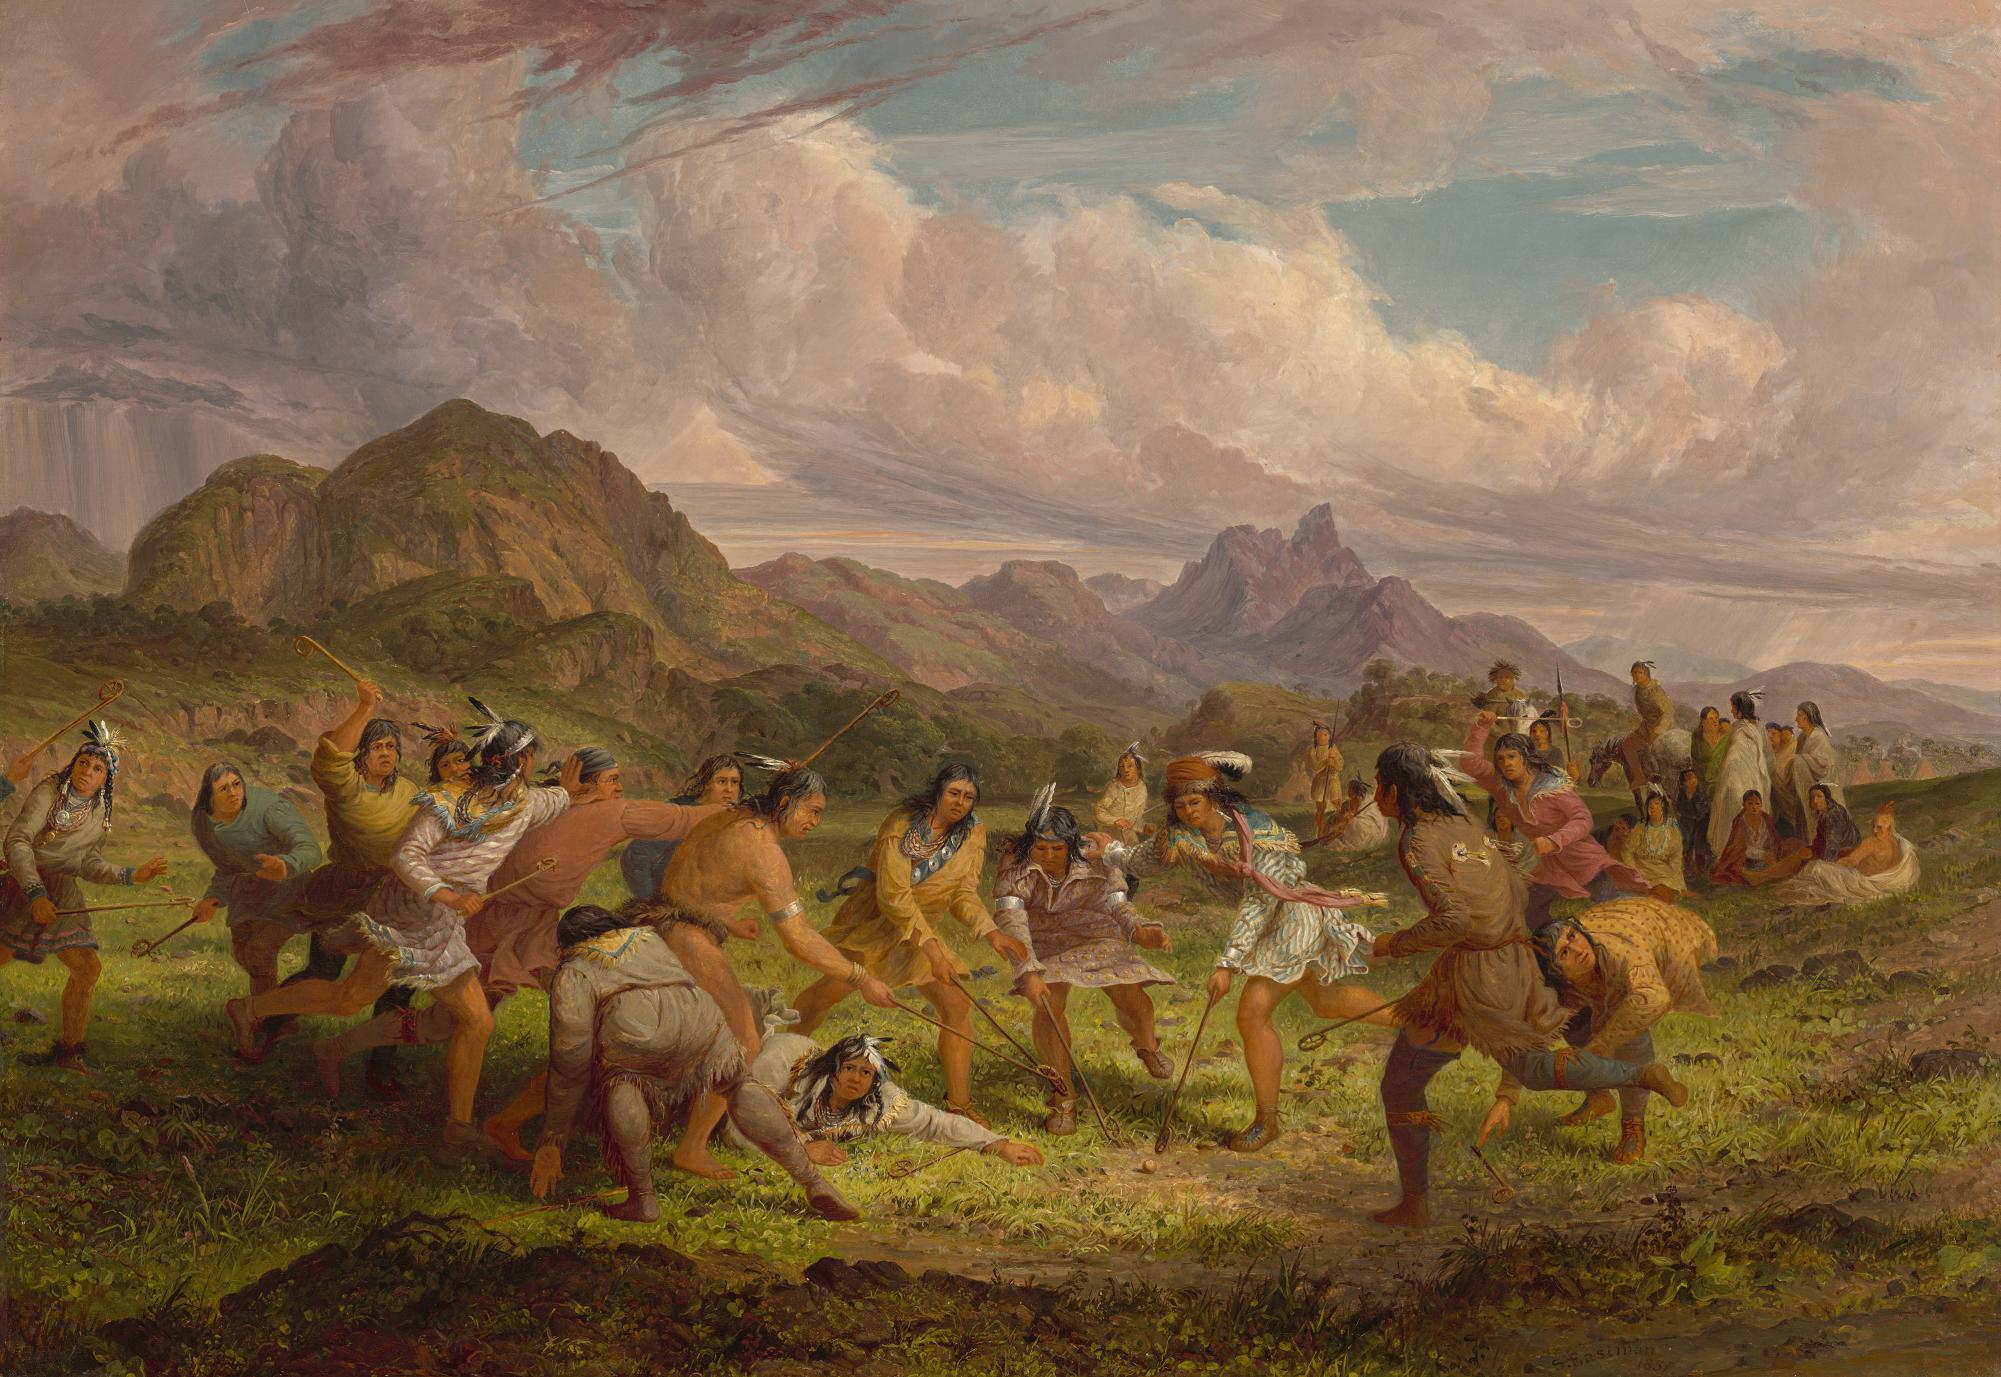 Created by artist Seth Eastman in 1851, the painting “Ball Playing among the Sioux Indians” depicts a group of Indigenous people in the midst of a competitive ball game.